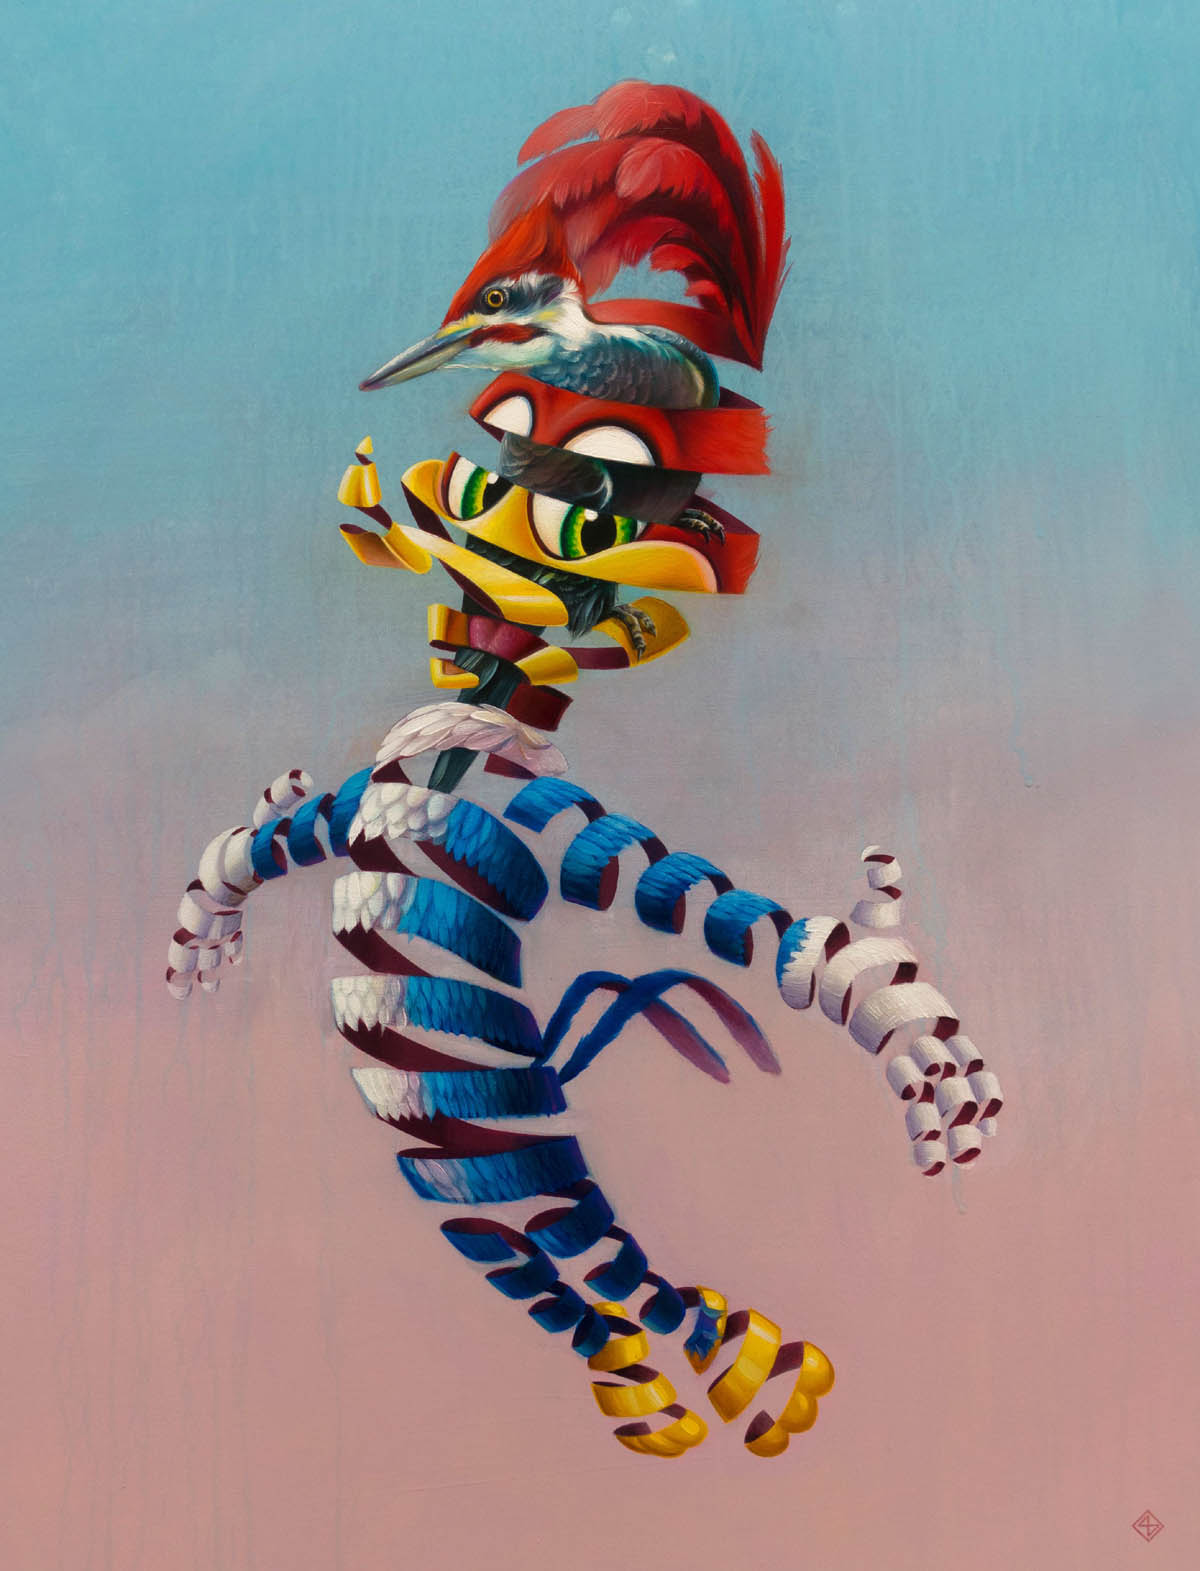 creative surreal paintings ideas woody by stefan thelen